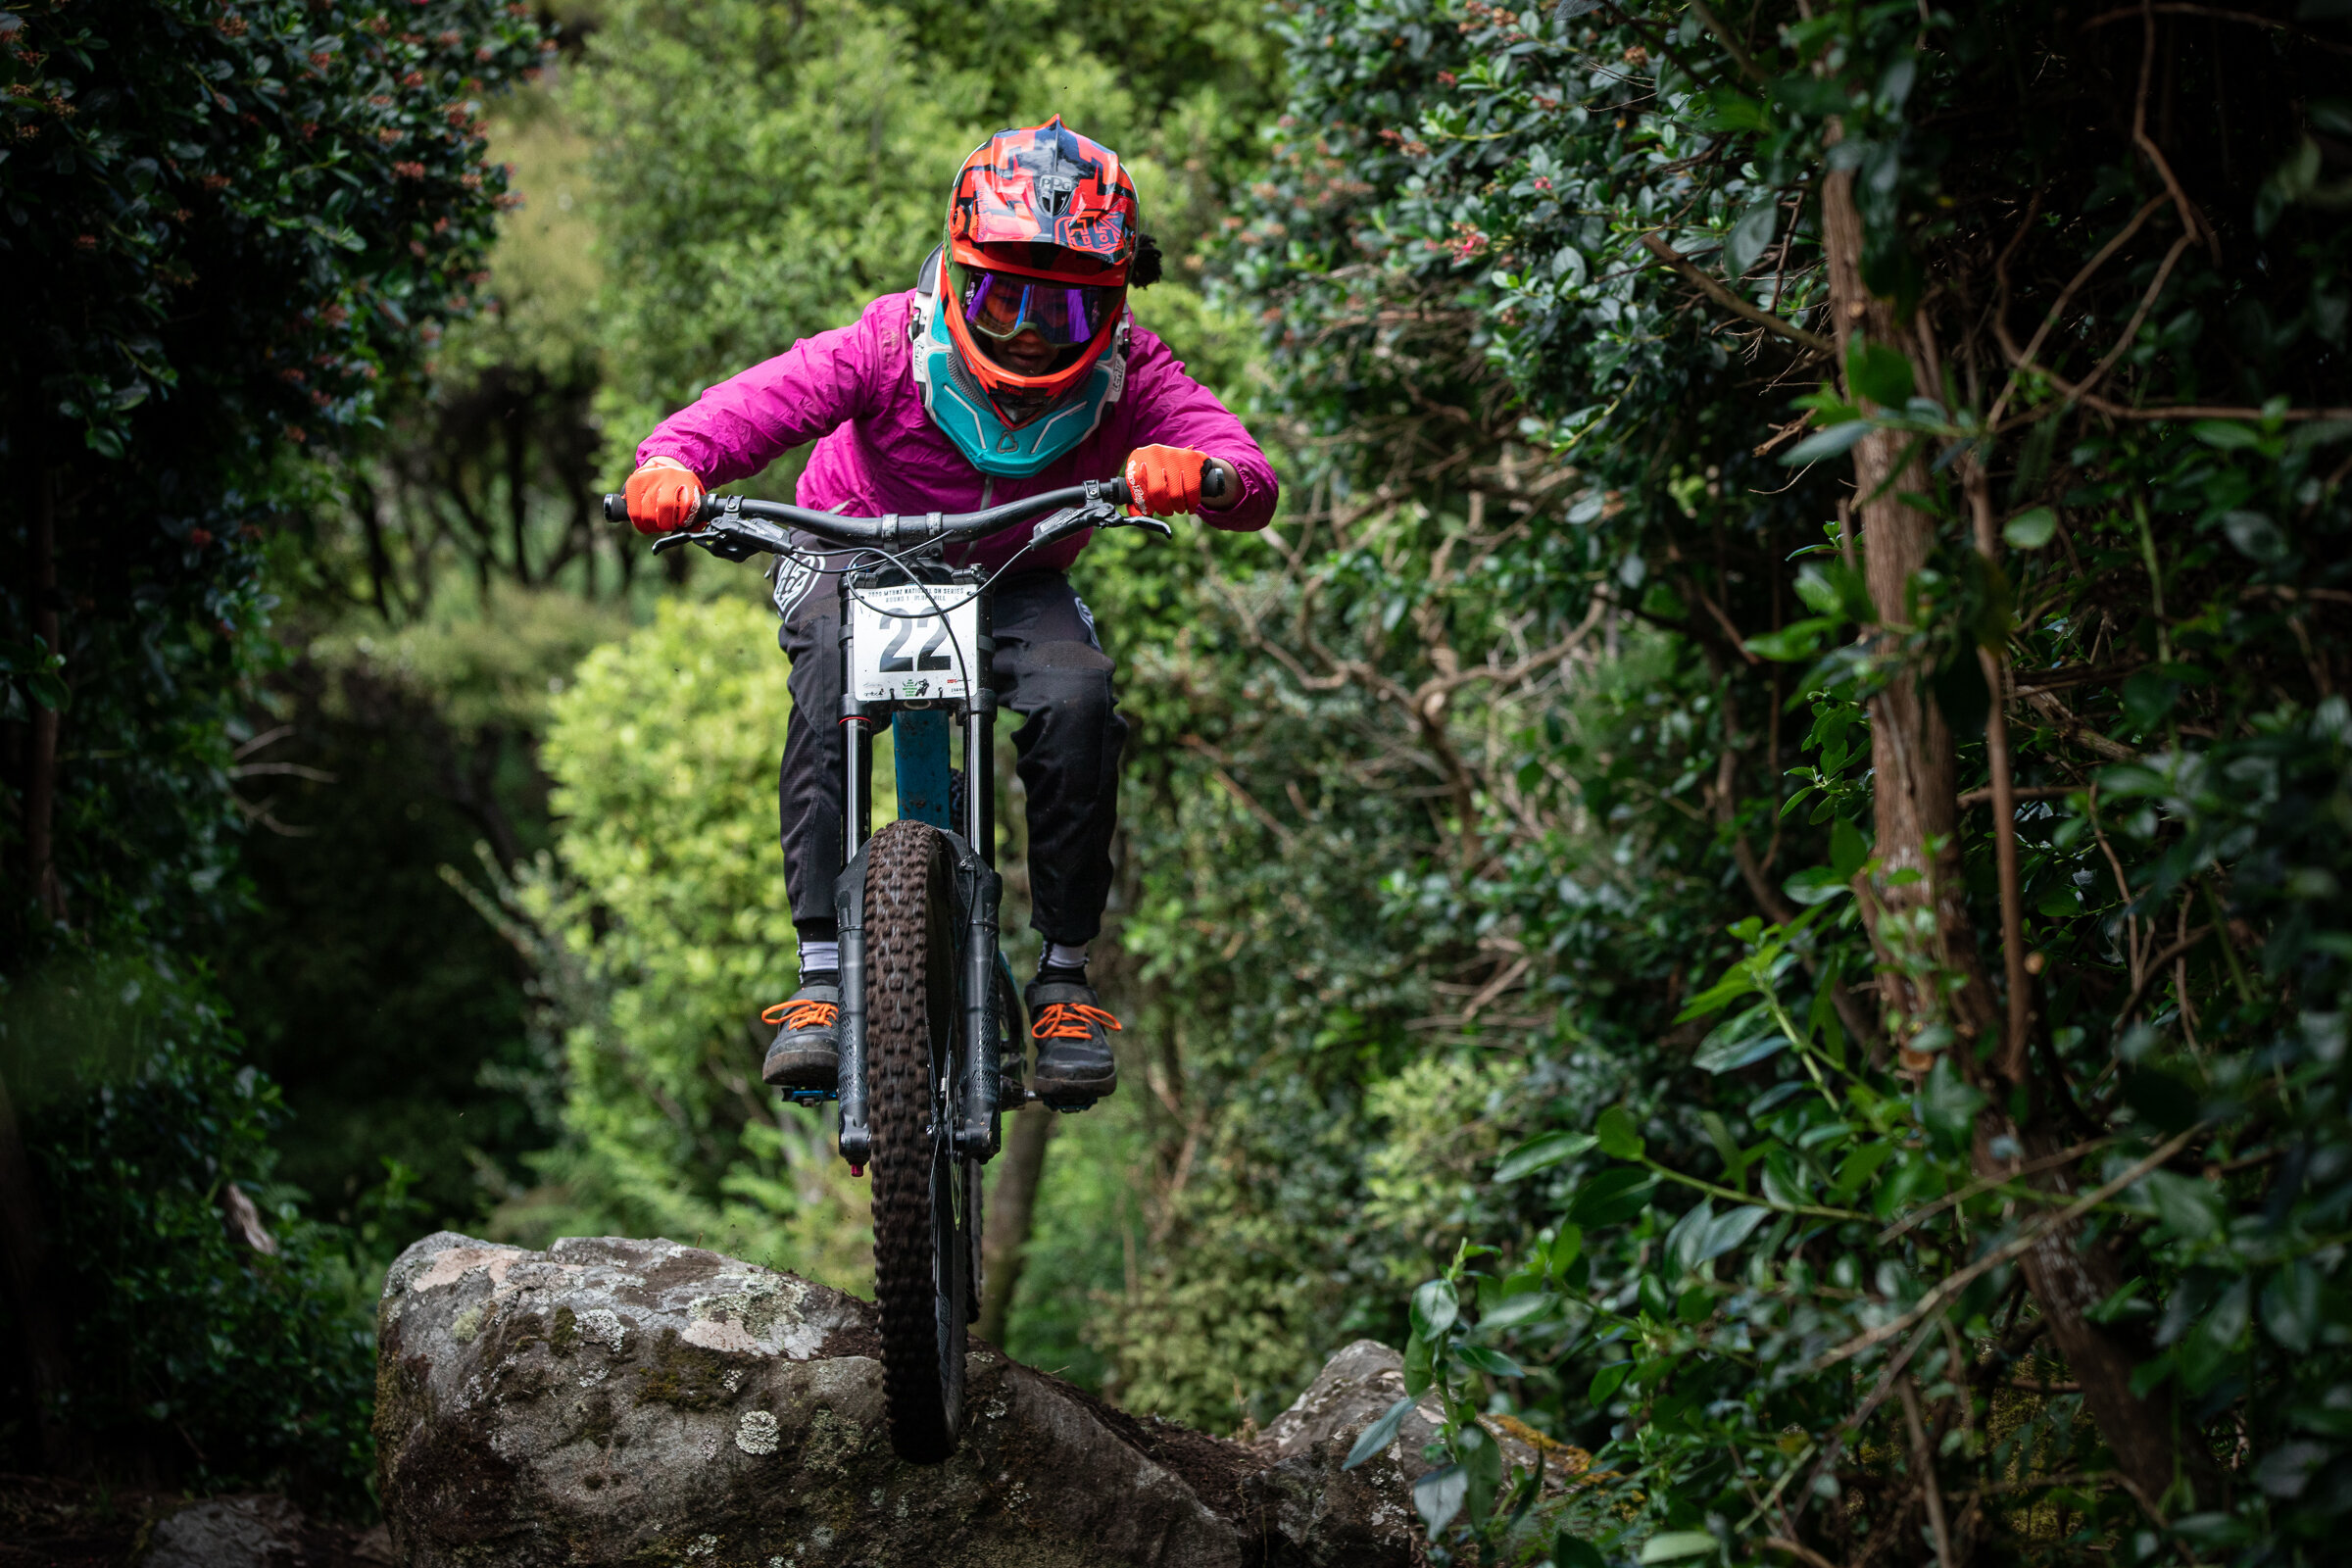 Sacha Earnest of Auckland is one to keep an eye on as she works her way up the ranks.